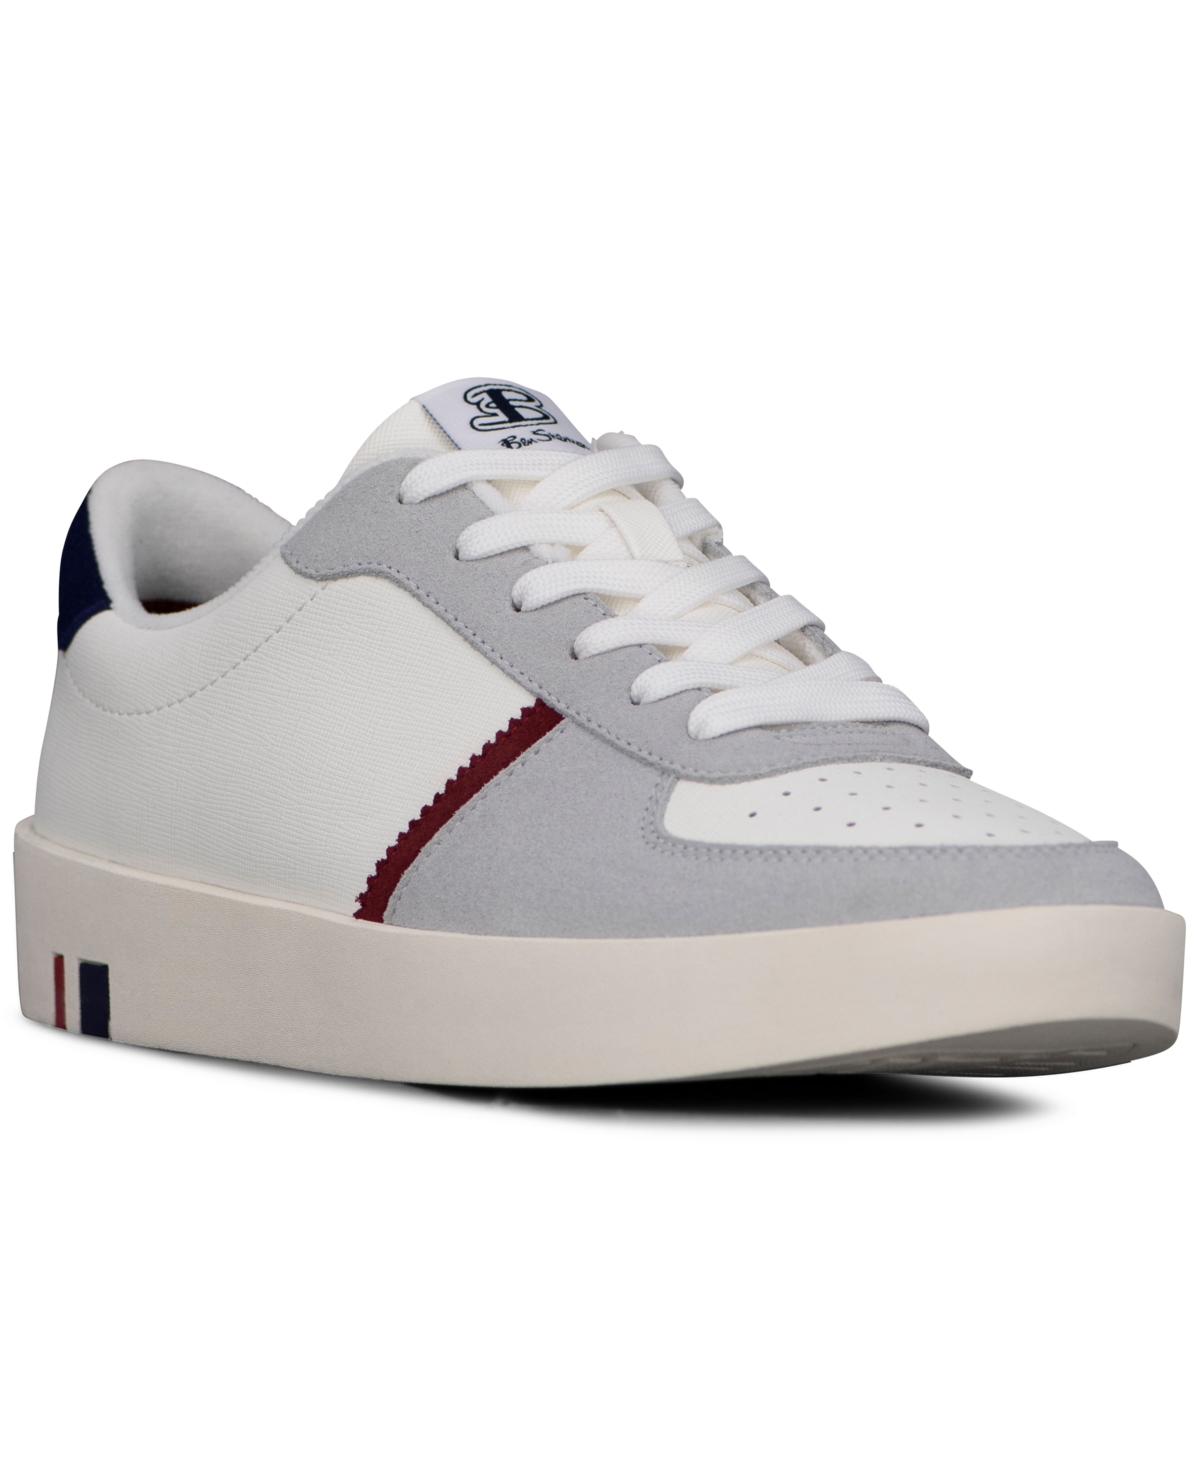 Men's Richmond Low Casual Sneakers from Finish Line - White/Grey